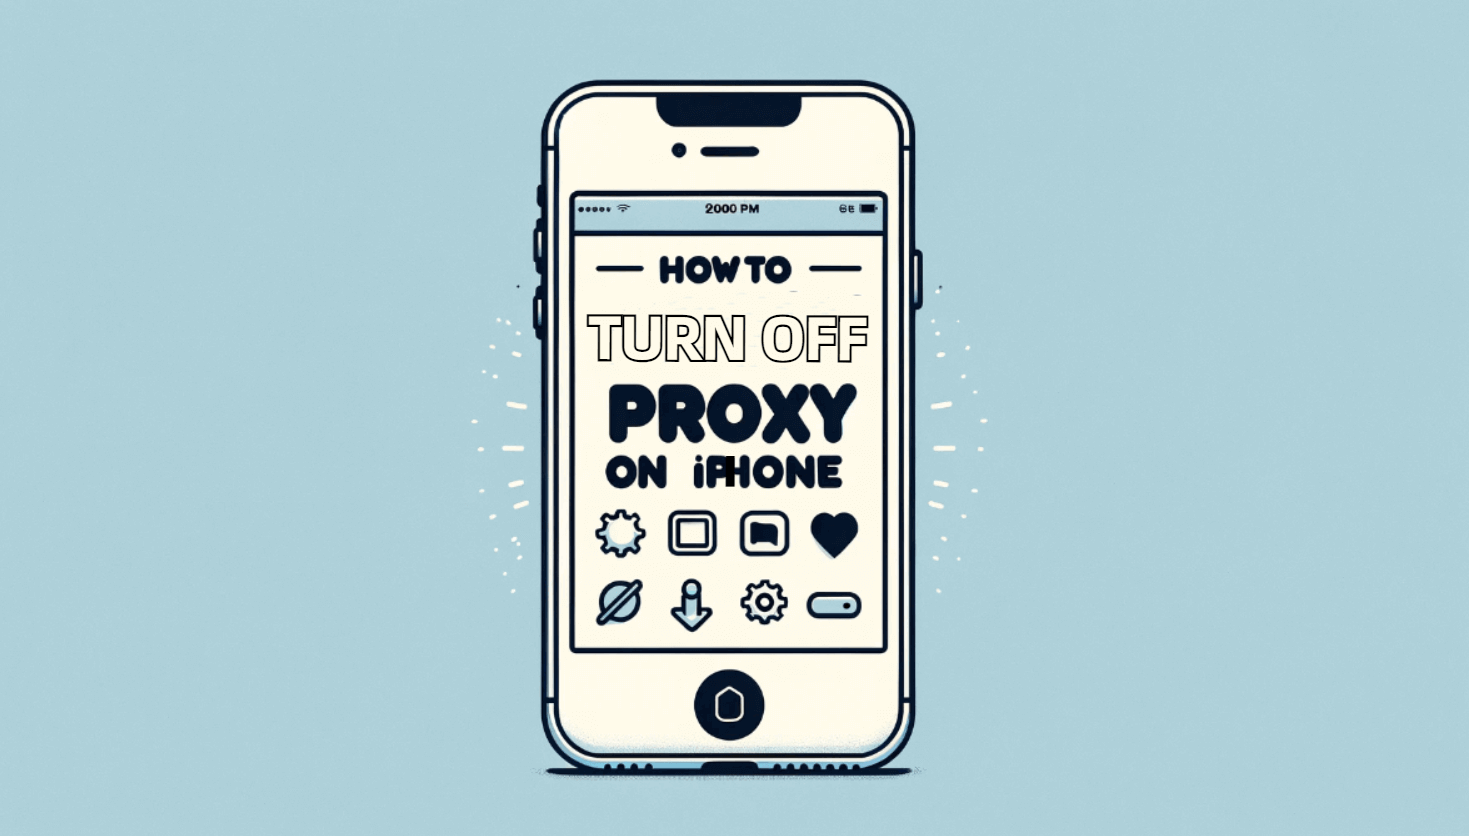 How to Turn off Proxy on iPhone